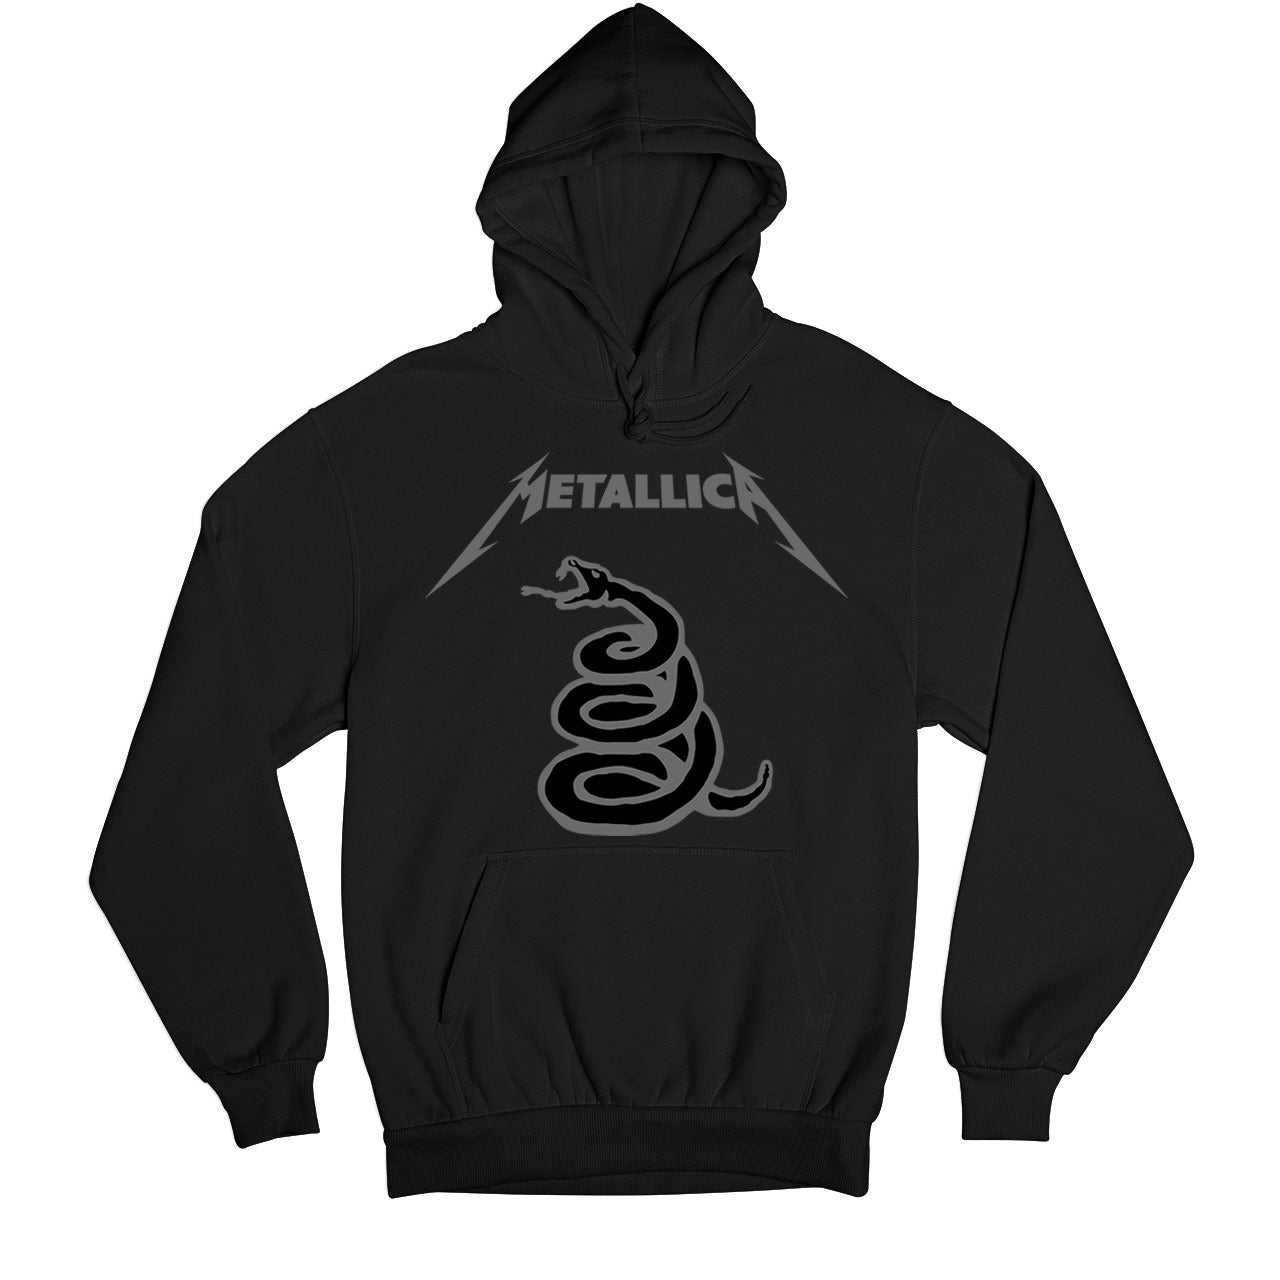 Metallica Hoodie - On Sale - L (Chest size 44 IN)